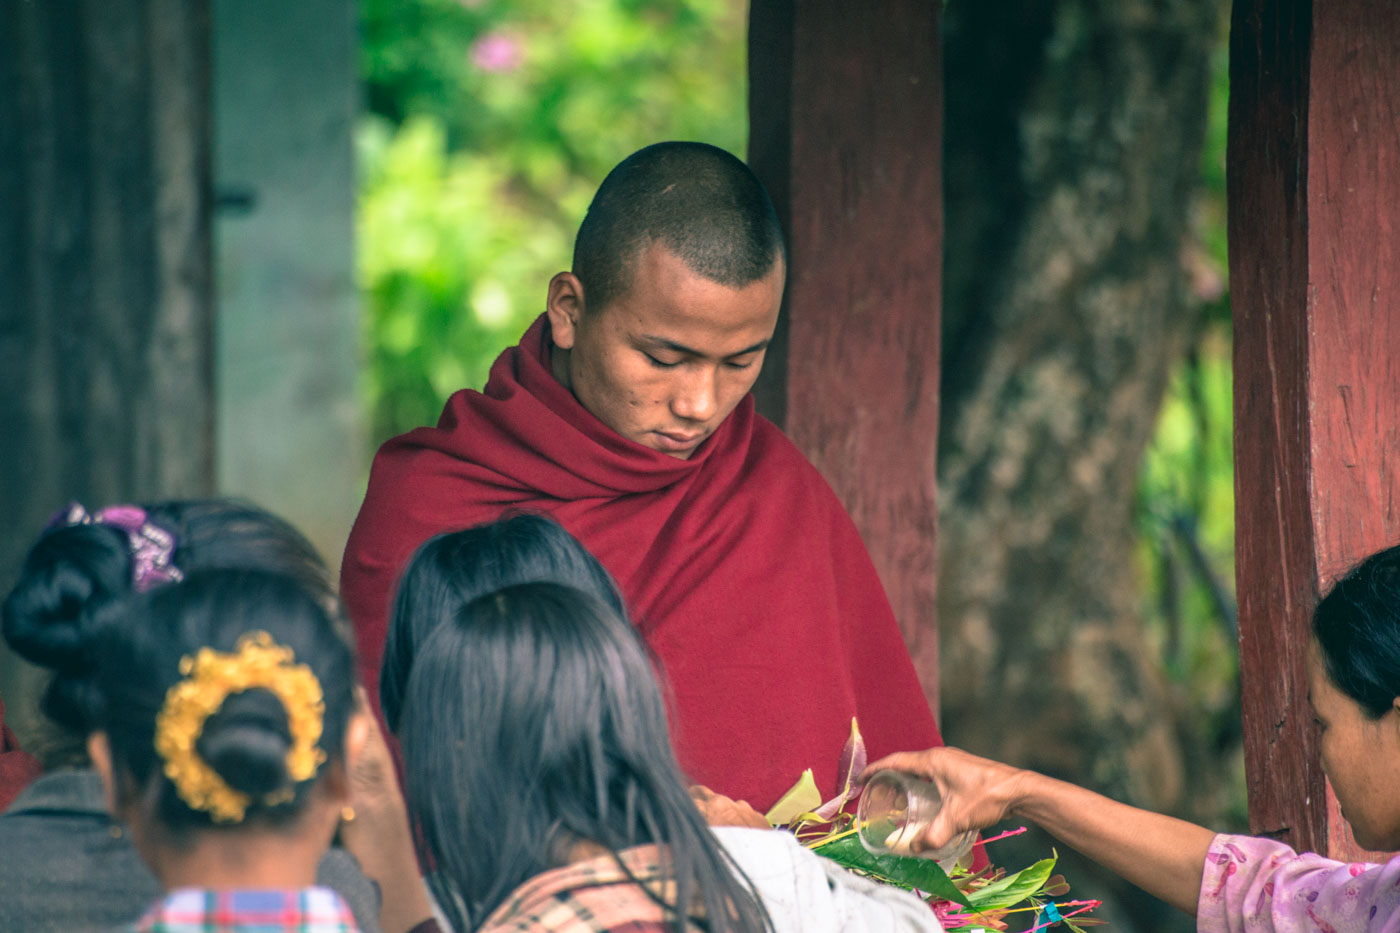 Burmese monk collecting offerings from the local people outside of the monastery in Myanmar.